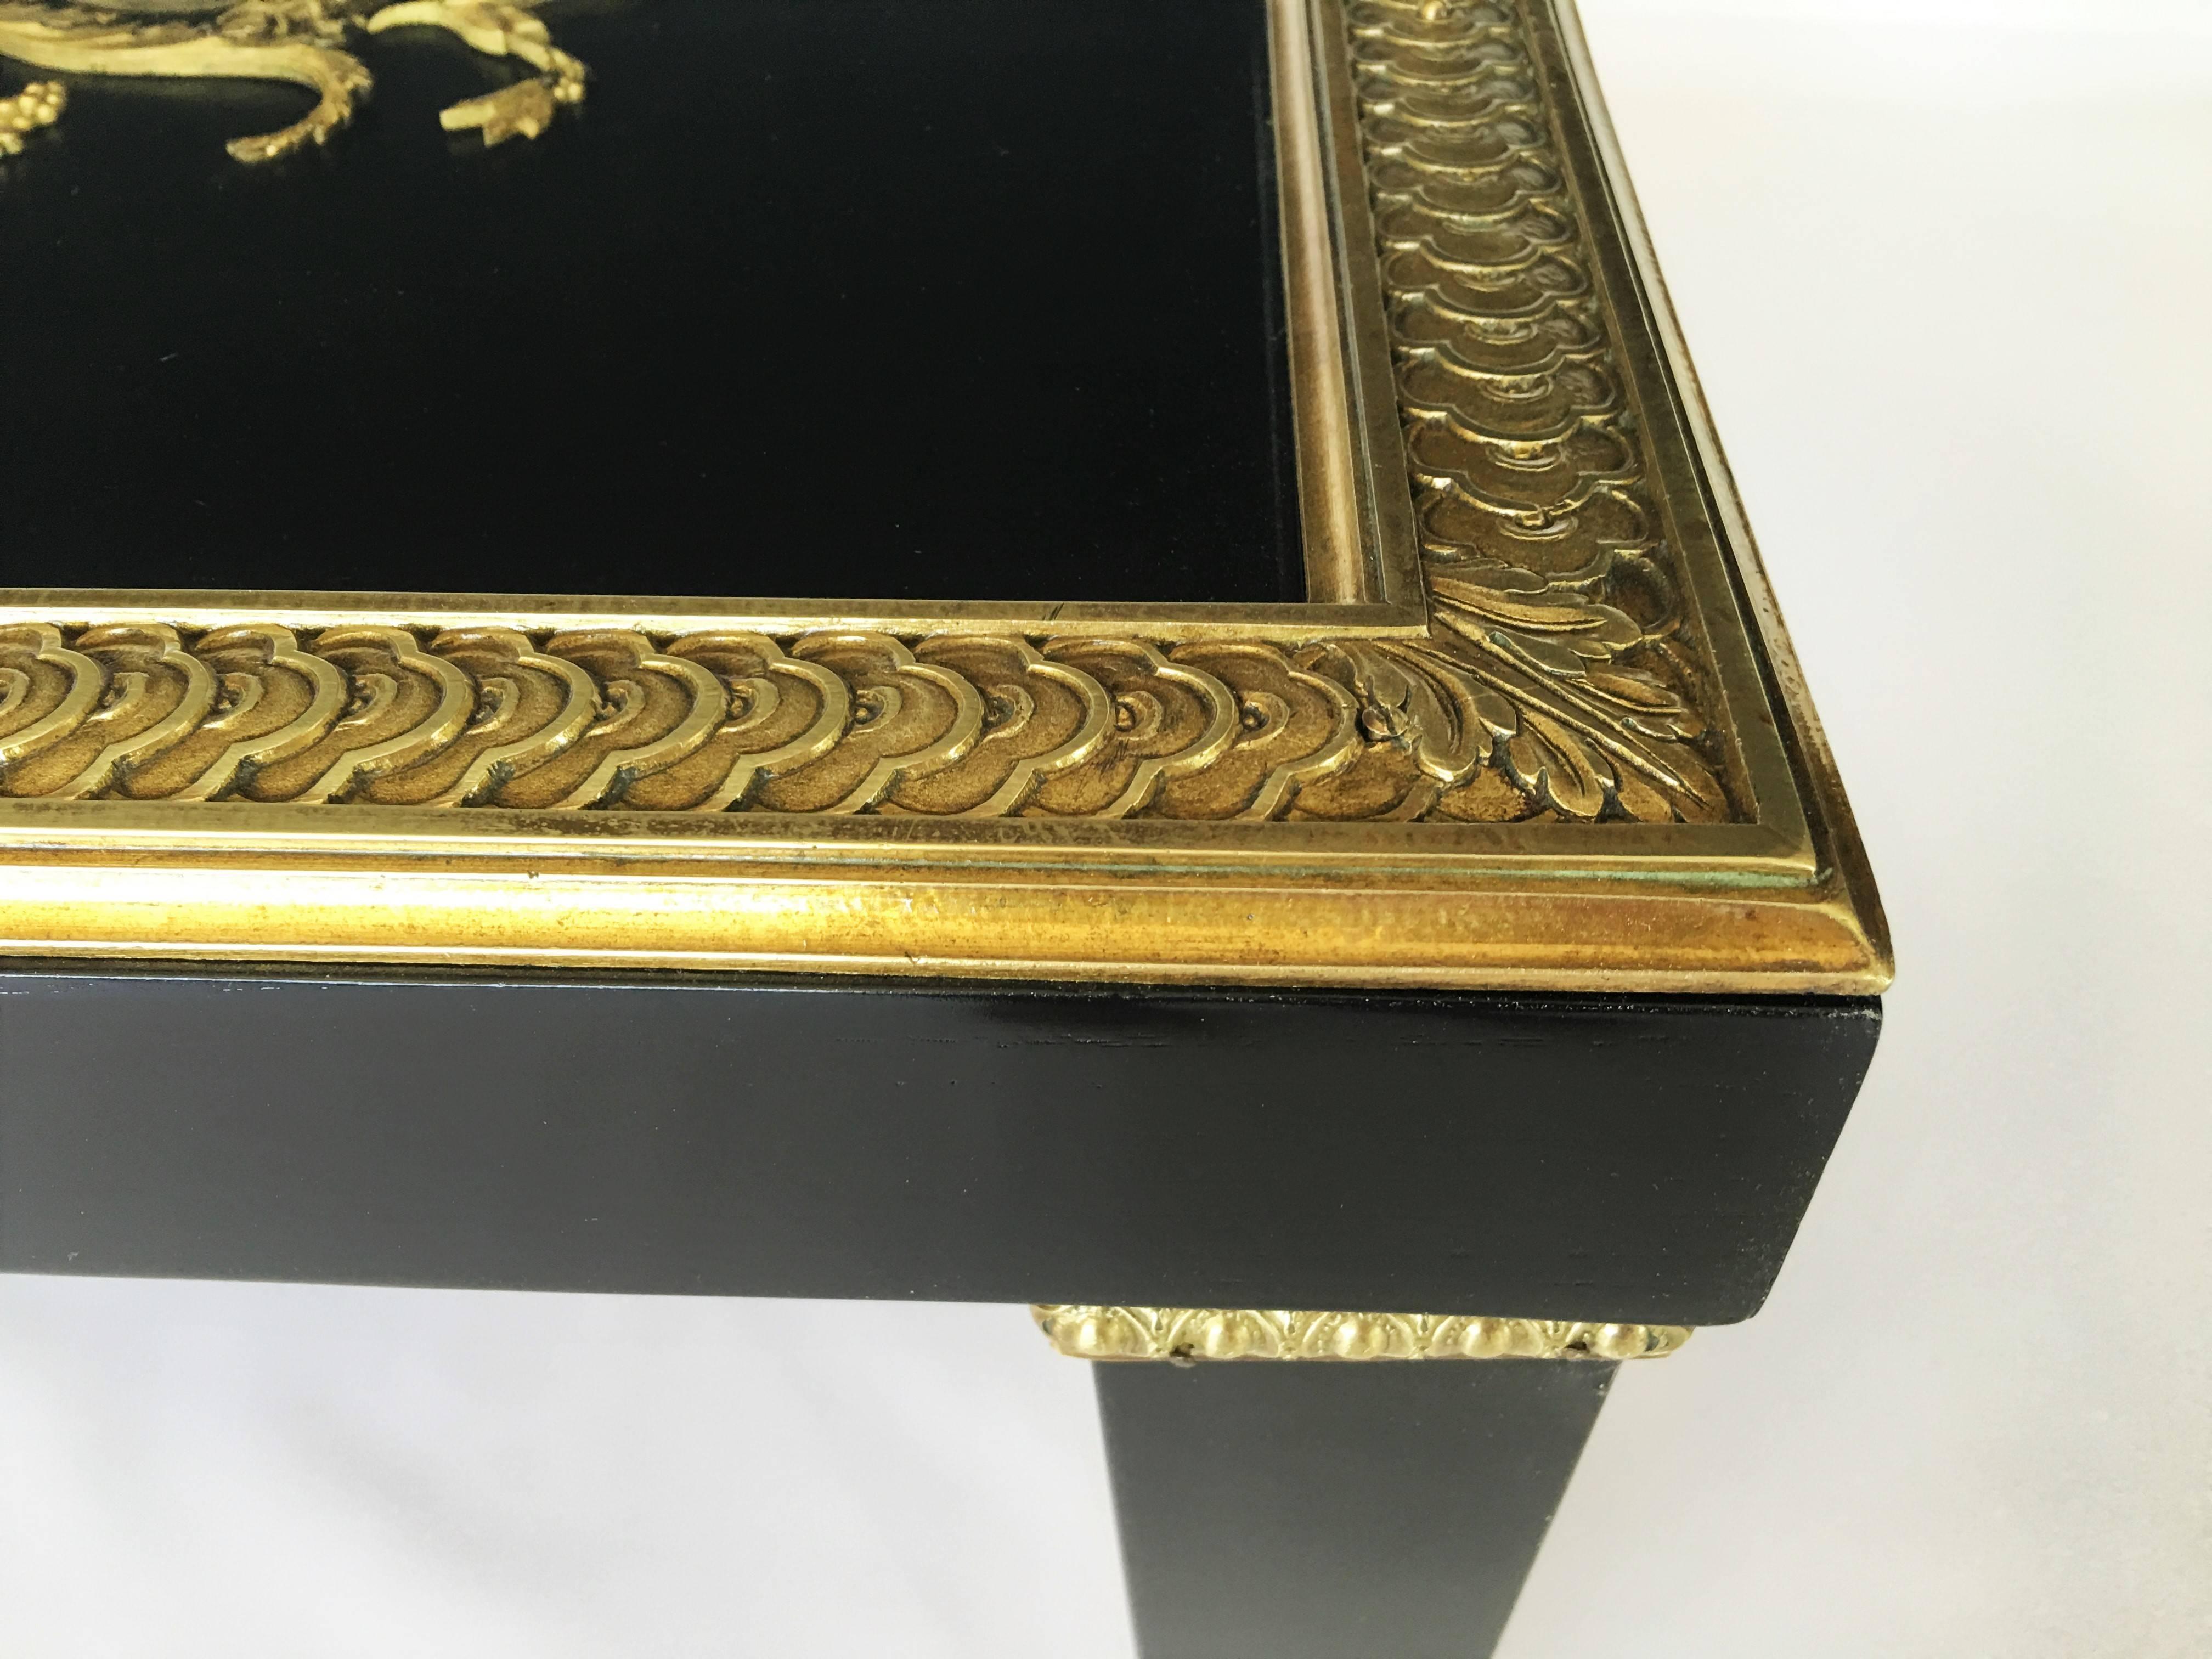 Regency Ebonized, Glass and Gilt Mounted Centre Table Attributed to Beurdeley For Sale 2